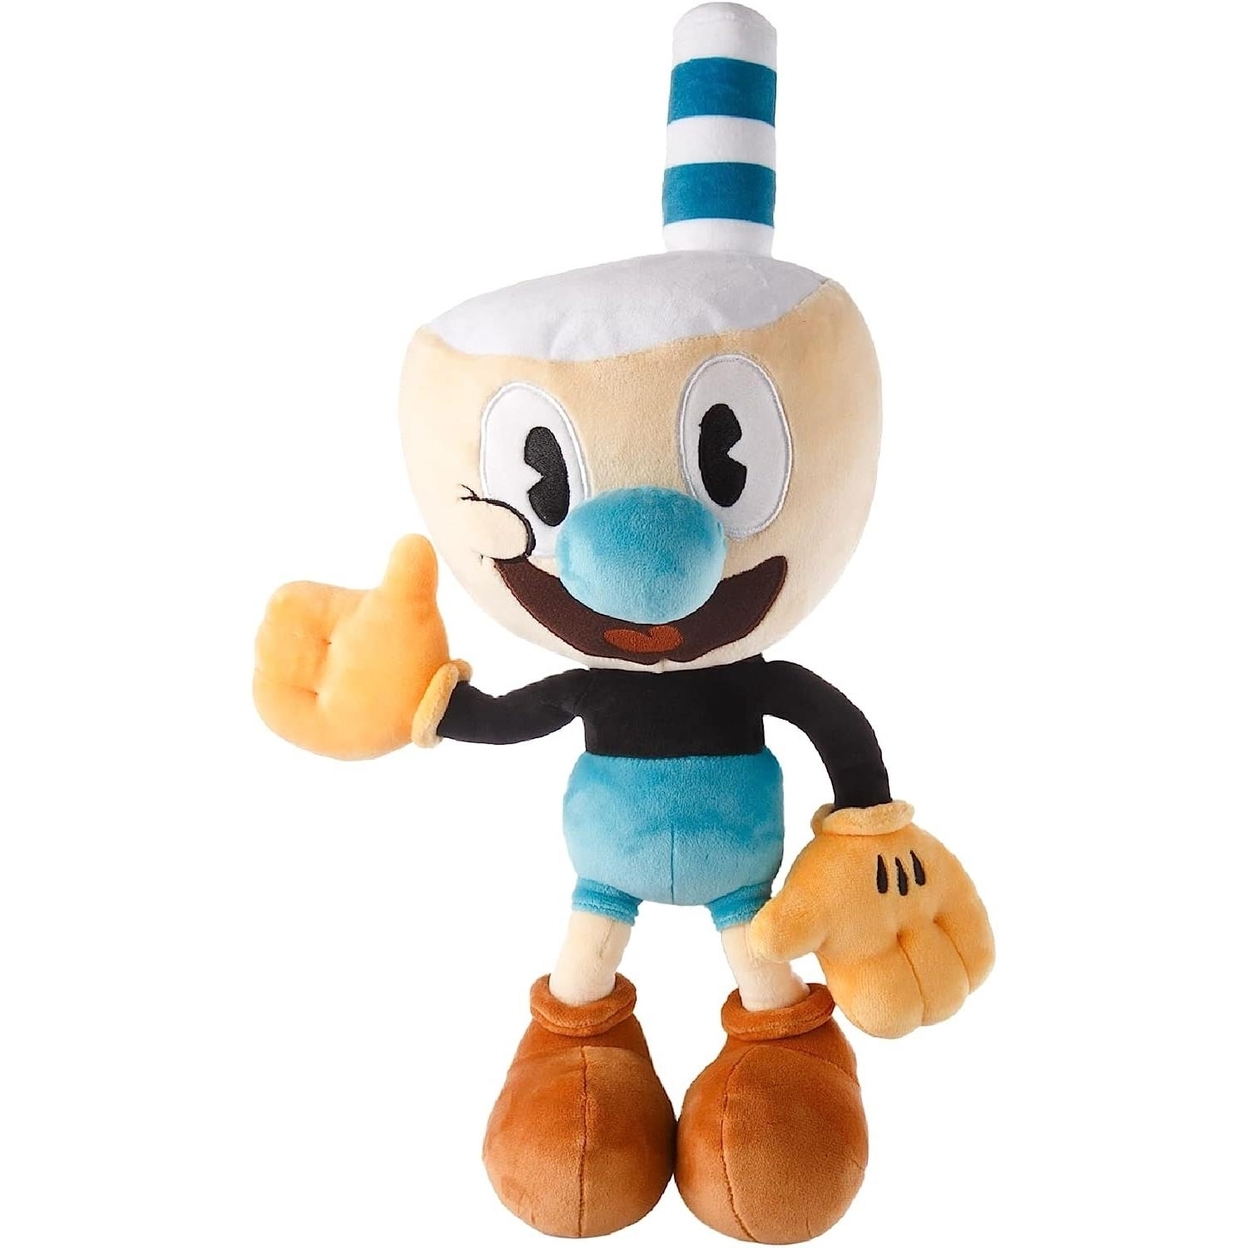 The Cuphead Show Mugman Plush Doll 15 Animated Series Character Soft Toy Mighty Mojo